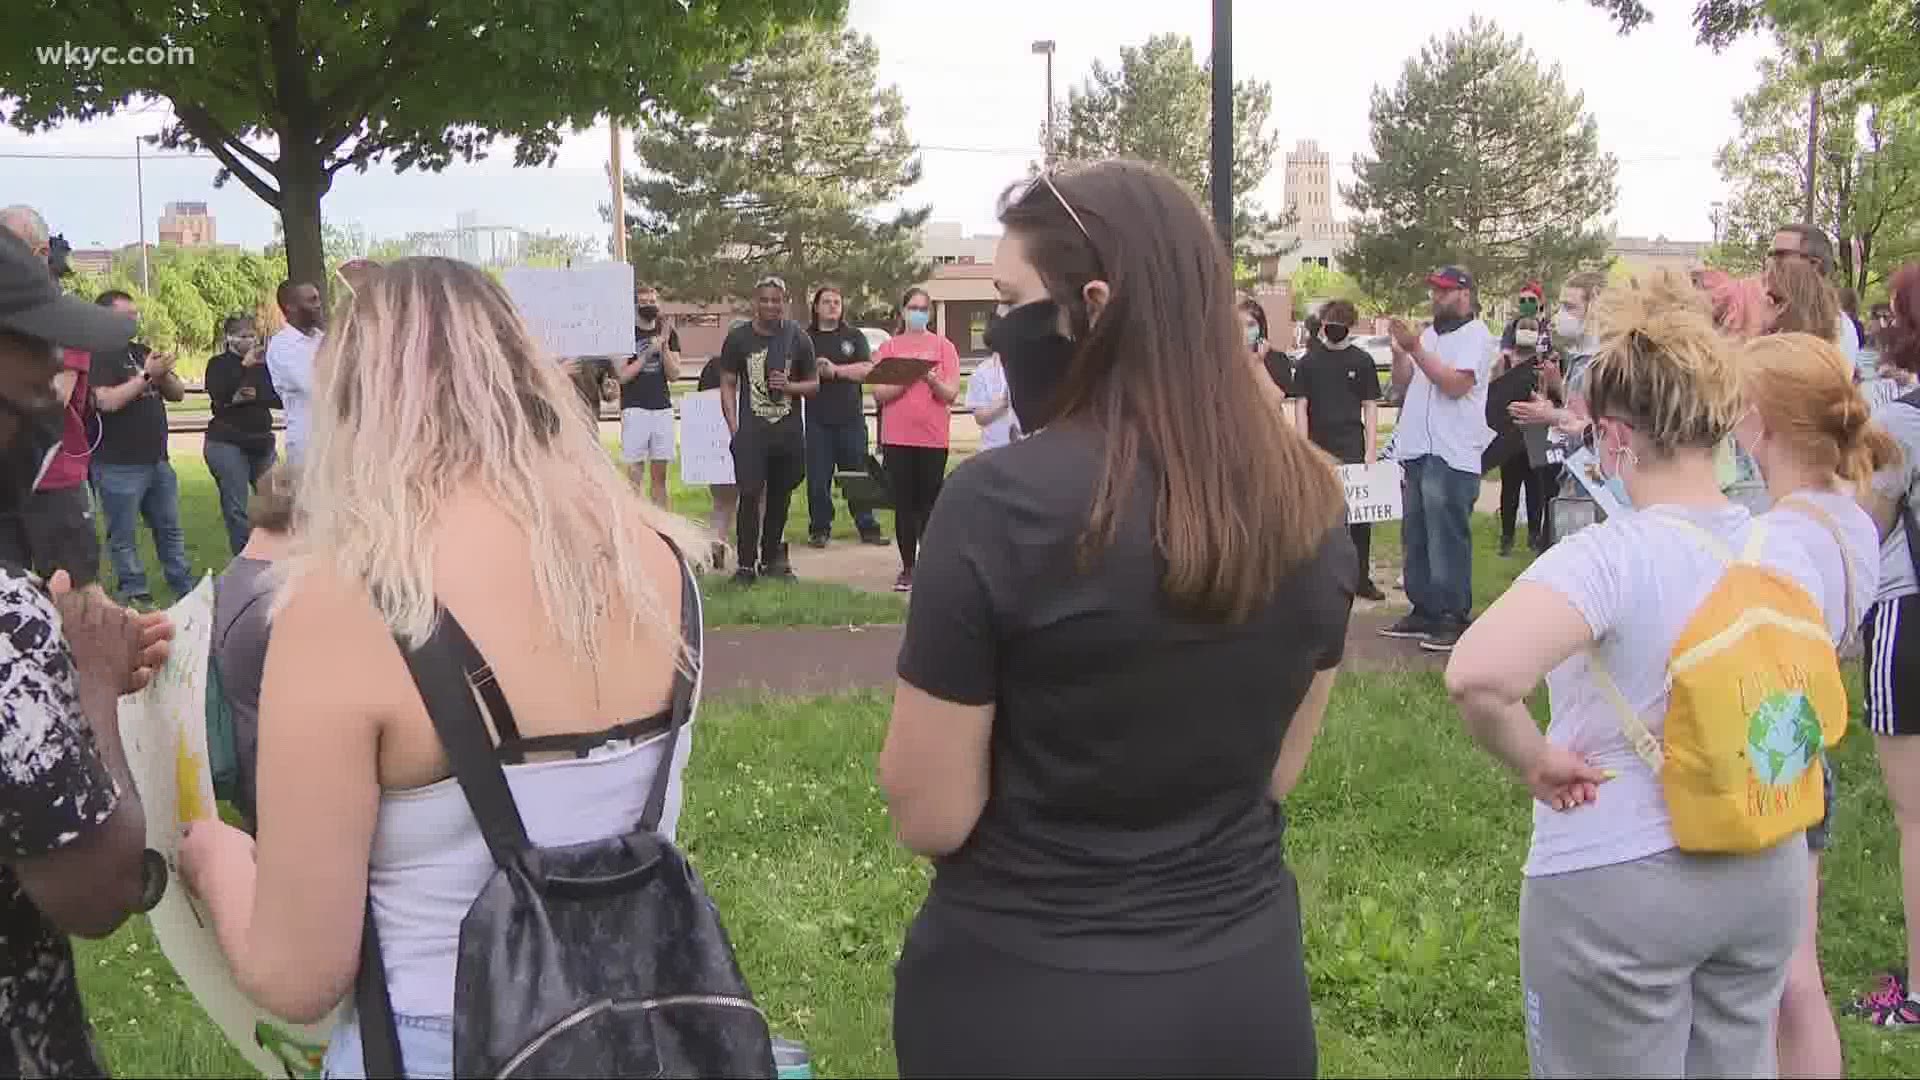 The latest demonstrations have been a stark contrast from what took place Saturday in Cleveland. Lynna Lai reports.